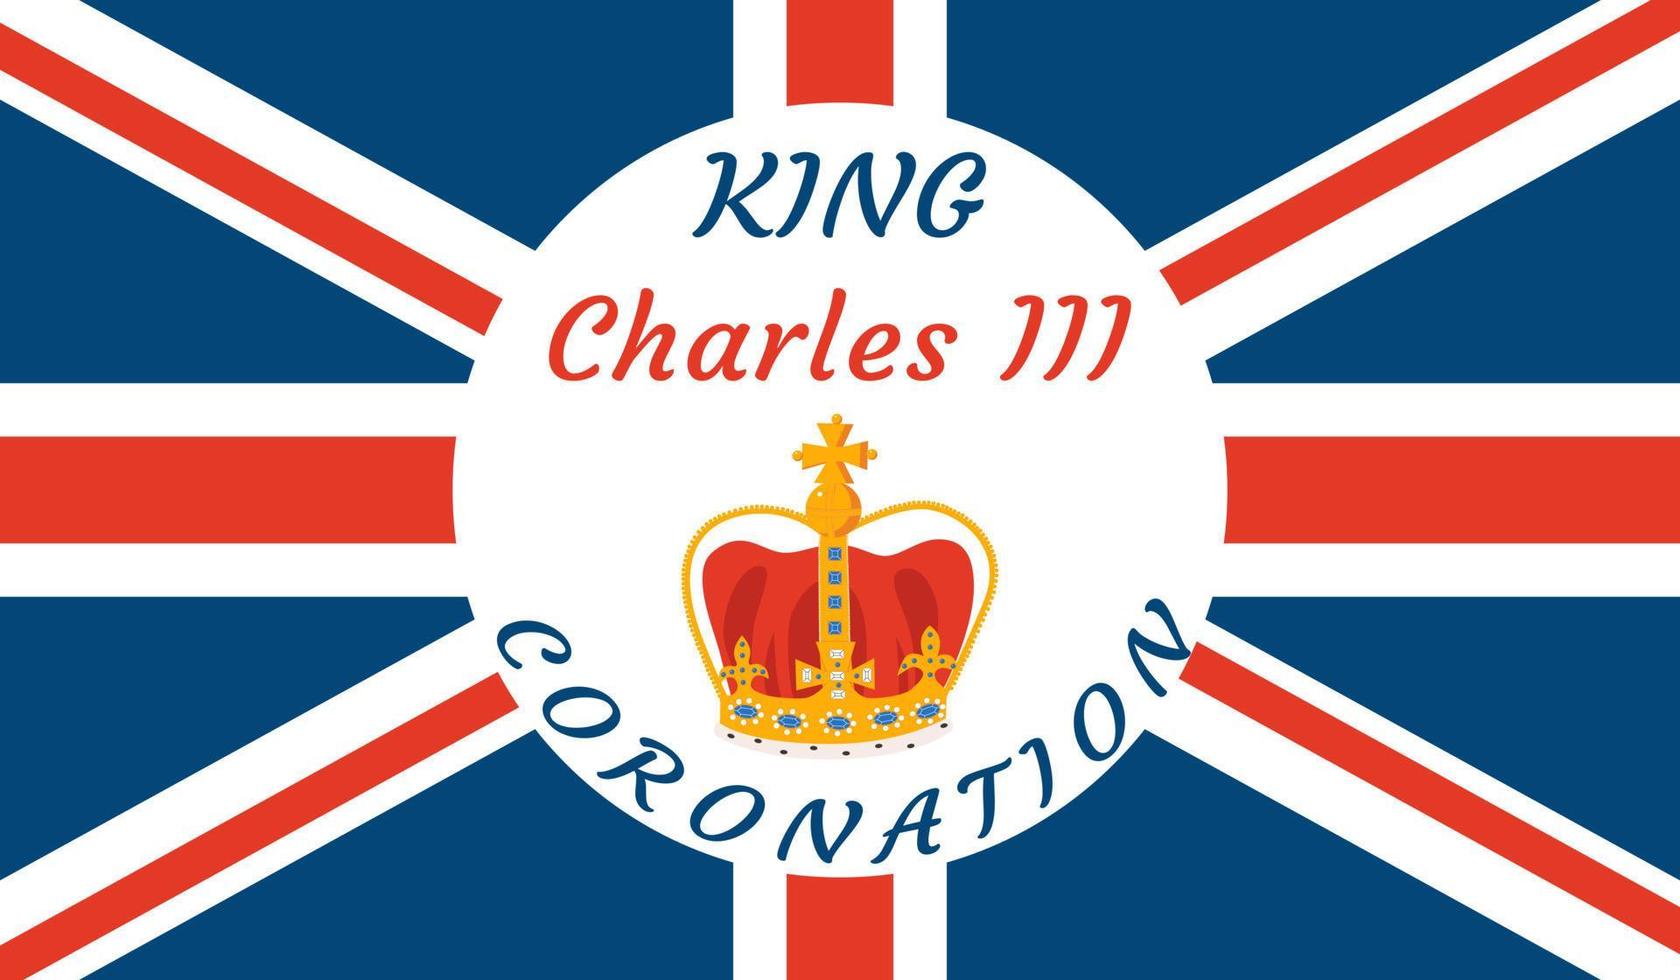 King Charles III. Banner for celebrate coronation and reign to the British throne. vector